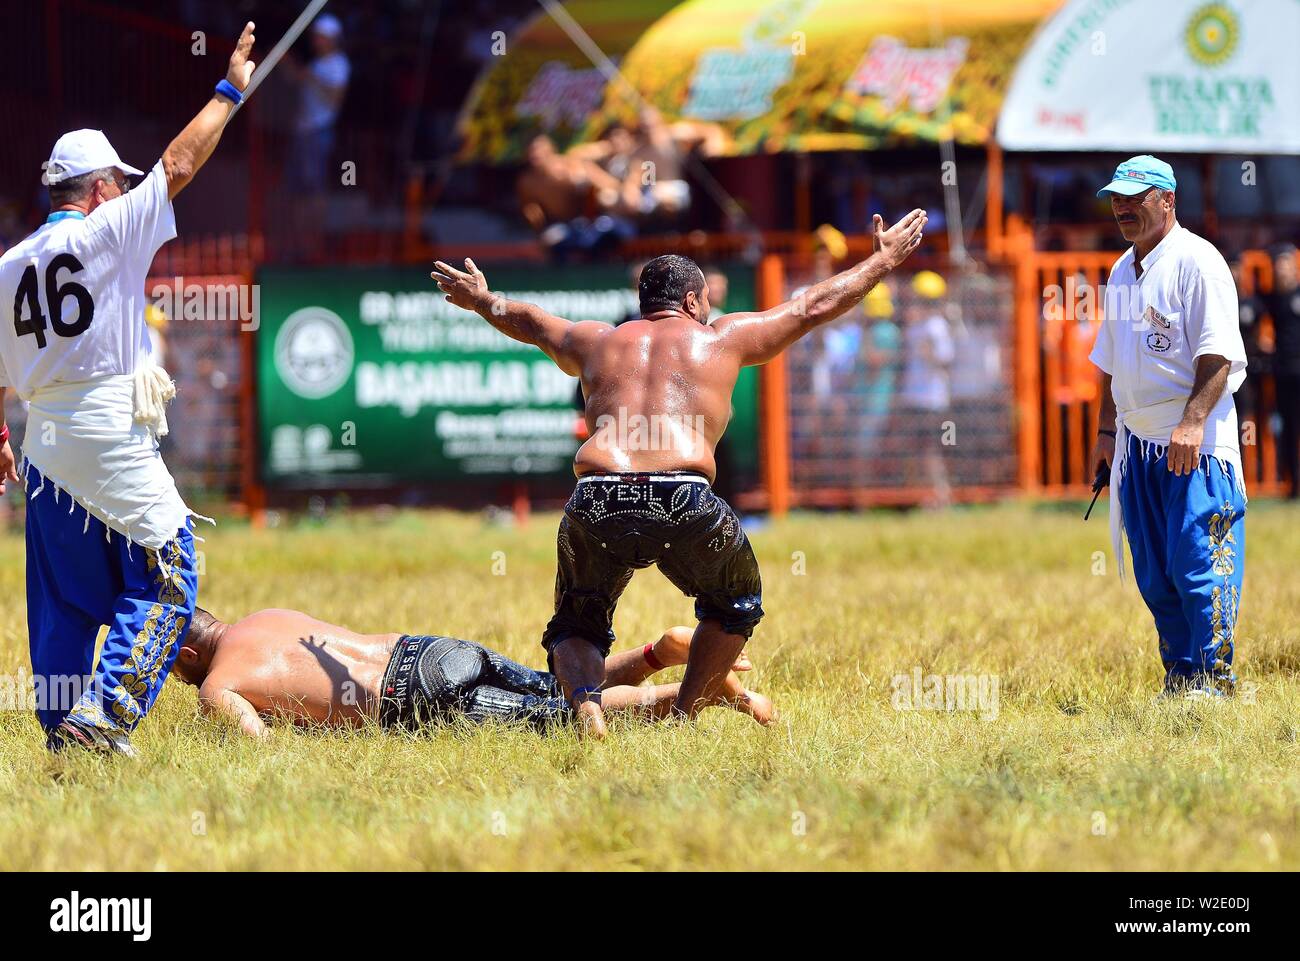 Ankara, Turkey. 7th July, 2019. Wrestlers are seen during the traditional Kirkpinar Oil Wrestling Festival in Edirne, Turkey, July 7, 2019. Turkey's Kirkpinar Oil Wrestling Festival is a centuries-old traditional sport event, in which sportsmen covered with olive oil compete to win a prestigious golden belt. TO GO WITH Feature: Turkey braces for major traditional oil wrestling tournament. Credit: Ihlas News Agency/Xinhua/Alamy Live News Stock Photo